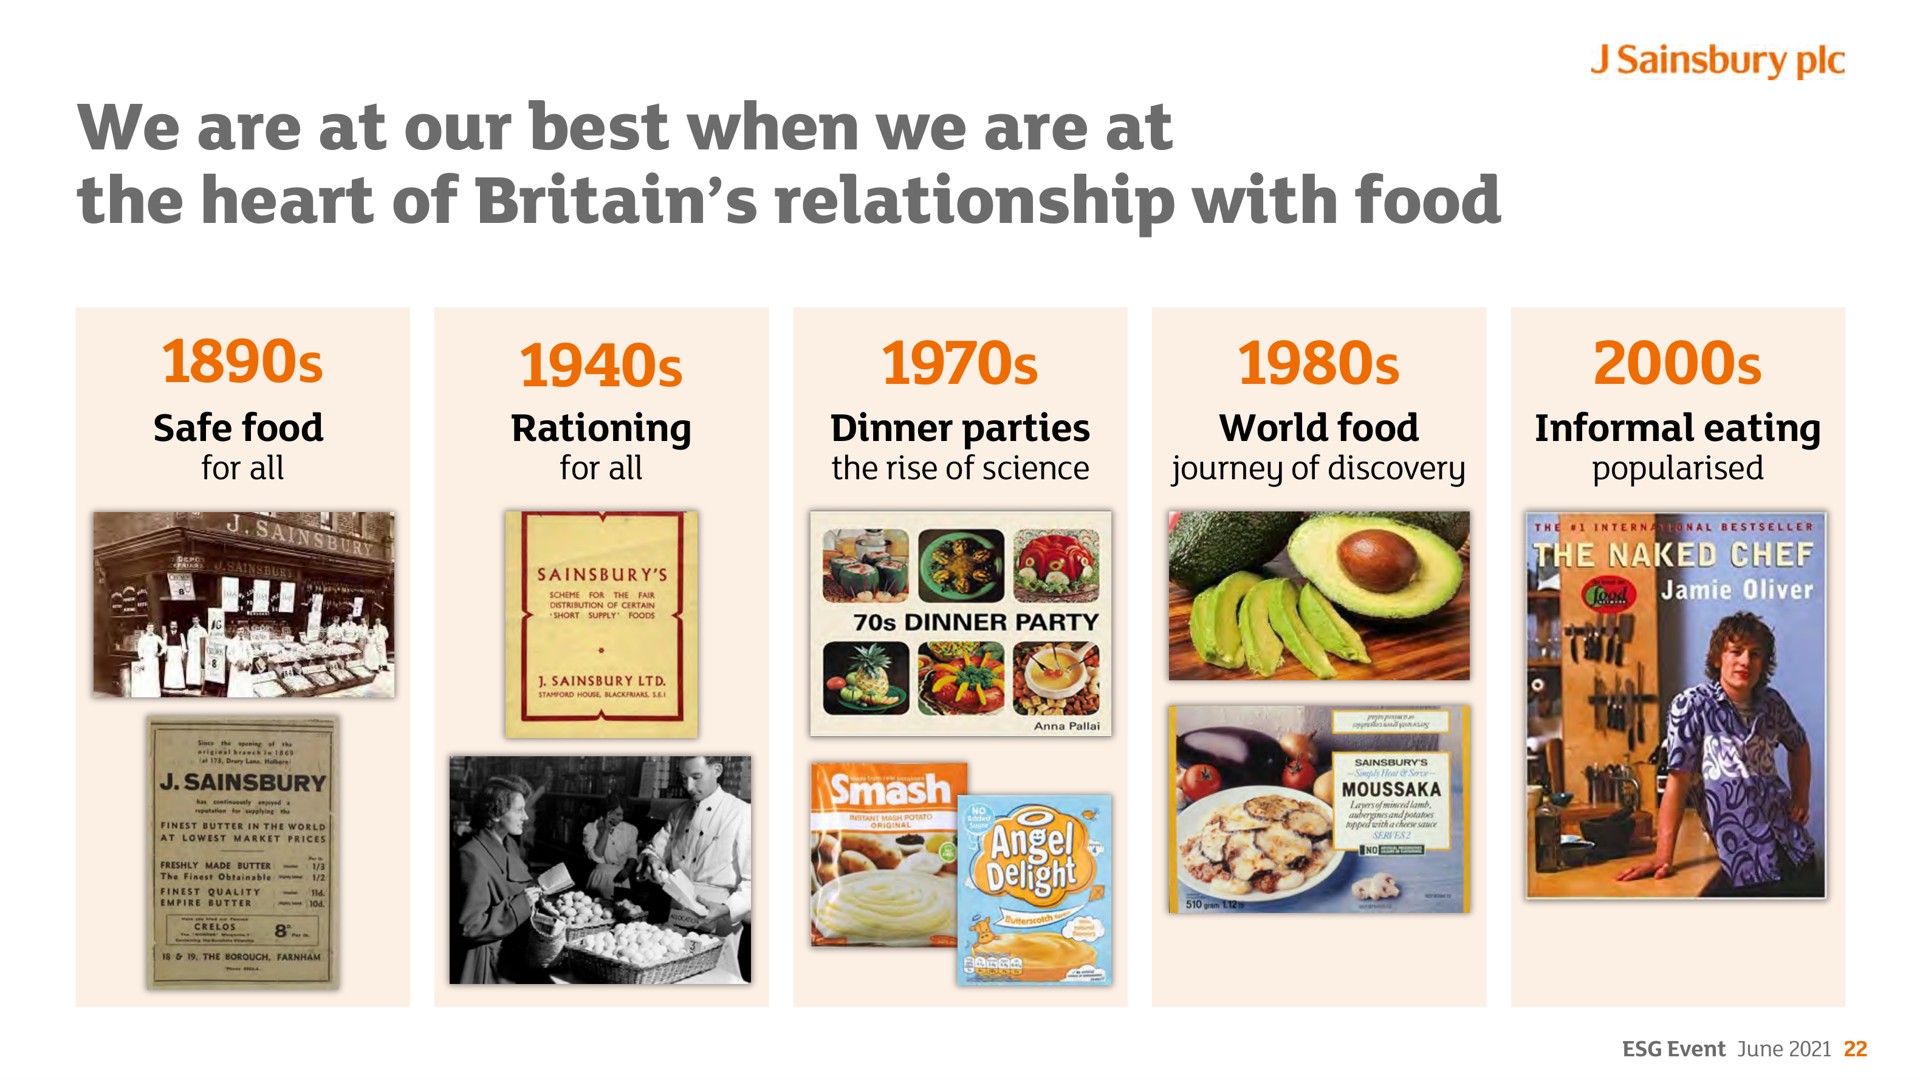 we are at our best when we are at the heart of relationship with food | Sainsbury's